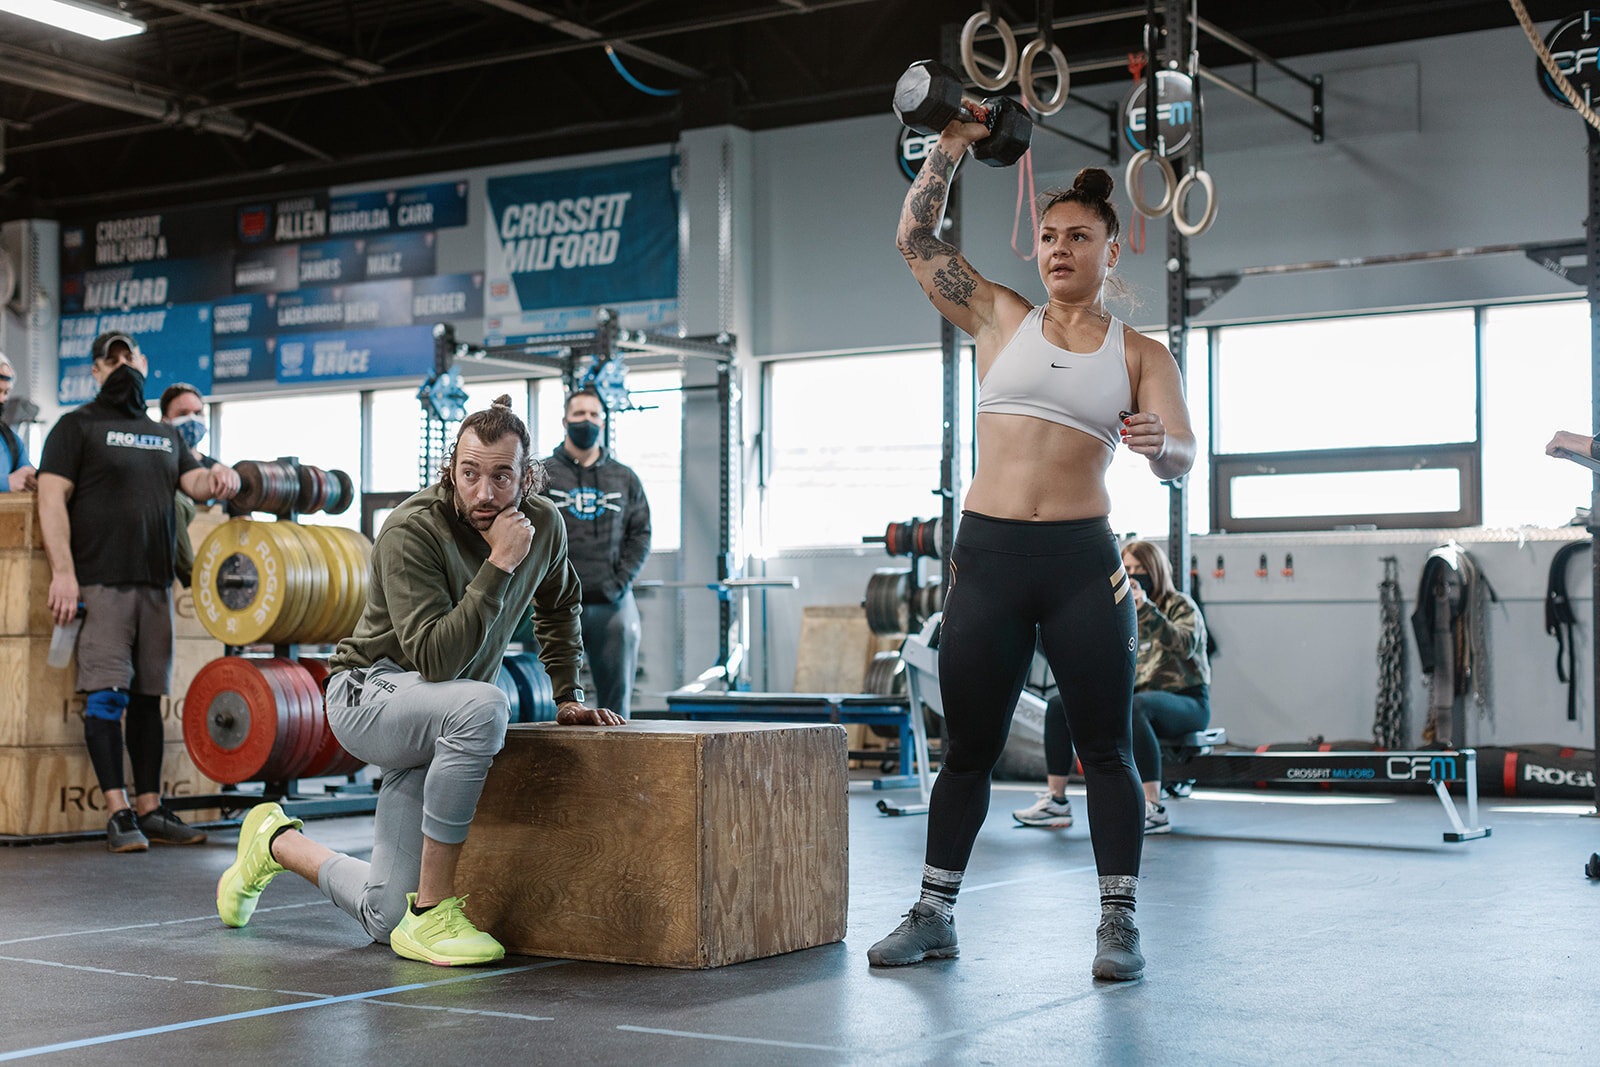 Now What? Best Way To Get Yourself Ready For The 2022 CrossFit Open